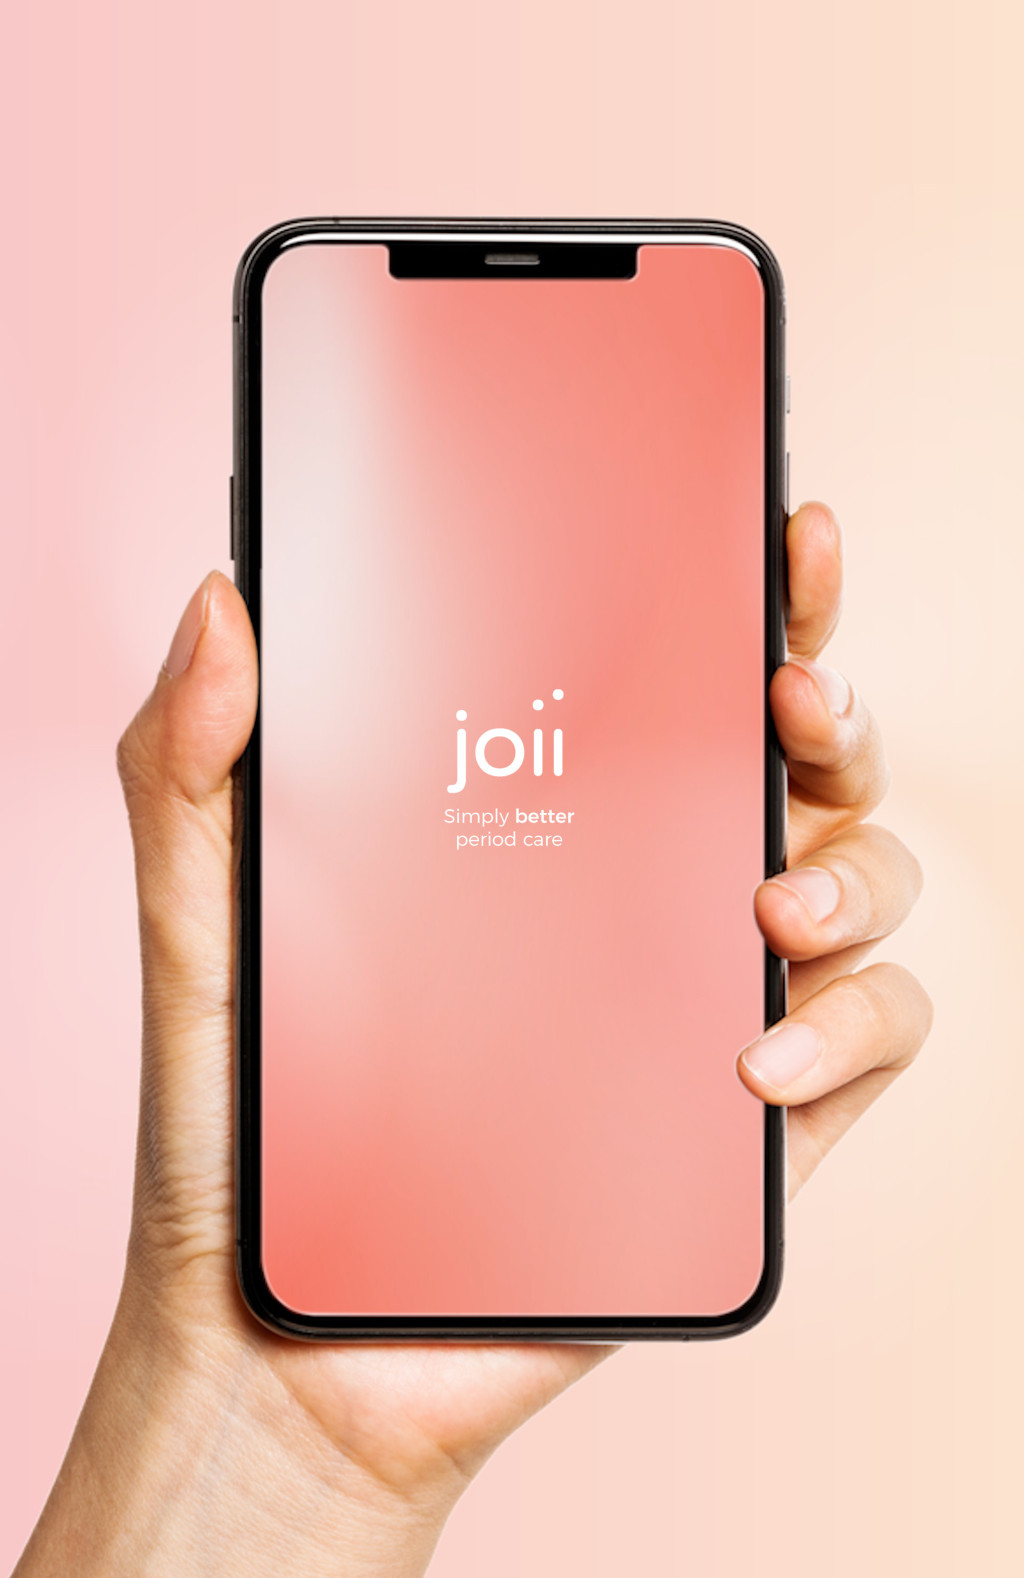 Pale pink and peach gradient background. Hand holding a smartphone displaying the Joii app home screen